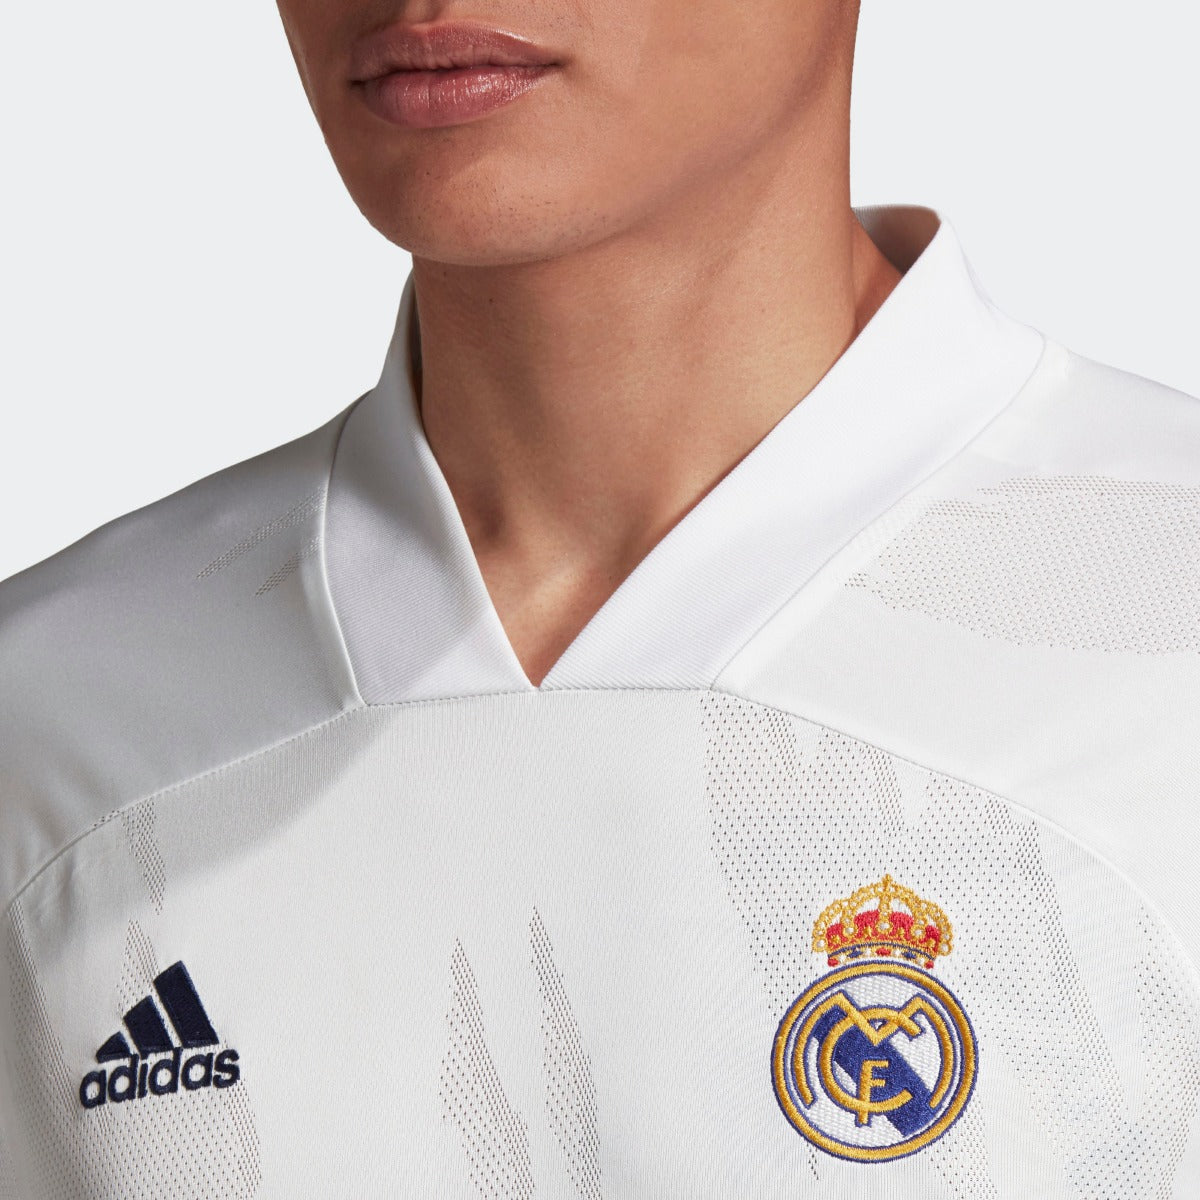 Adidas 2020-21 Real Madrid Home Jersey - White-Pink